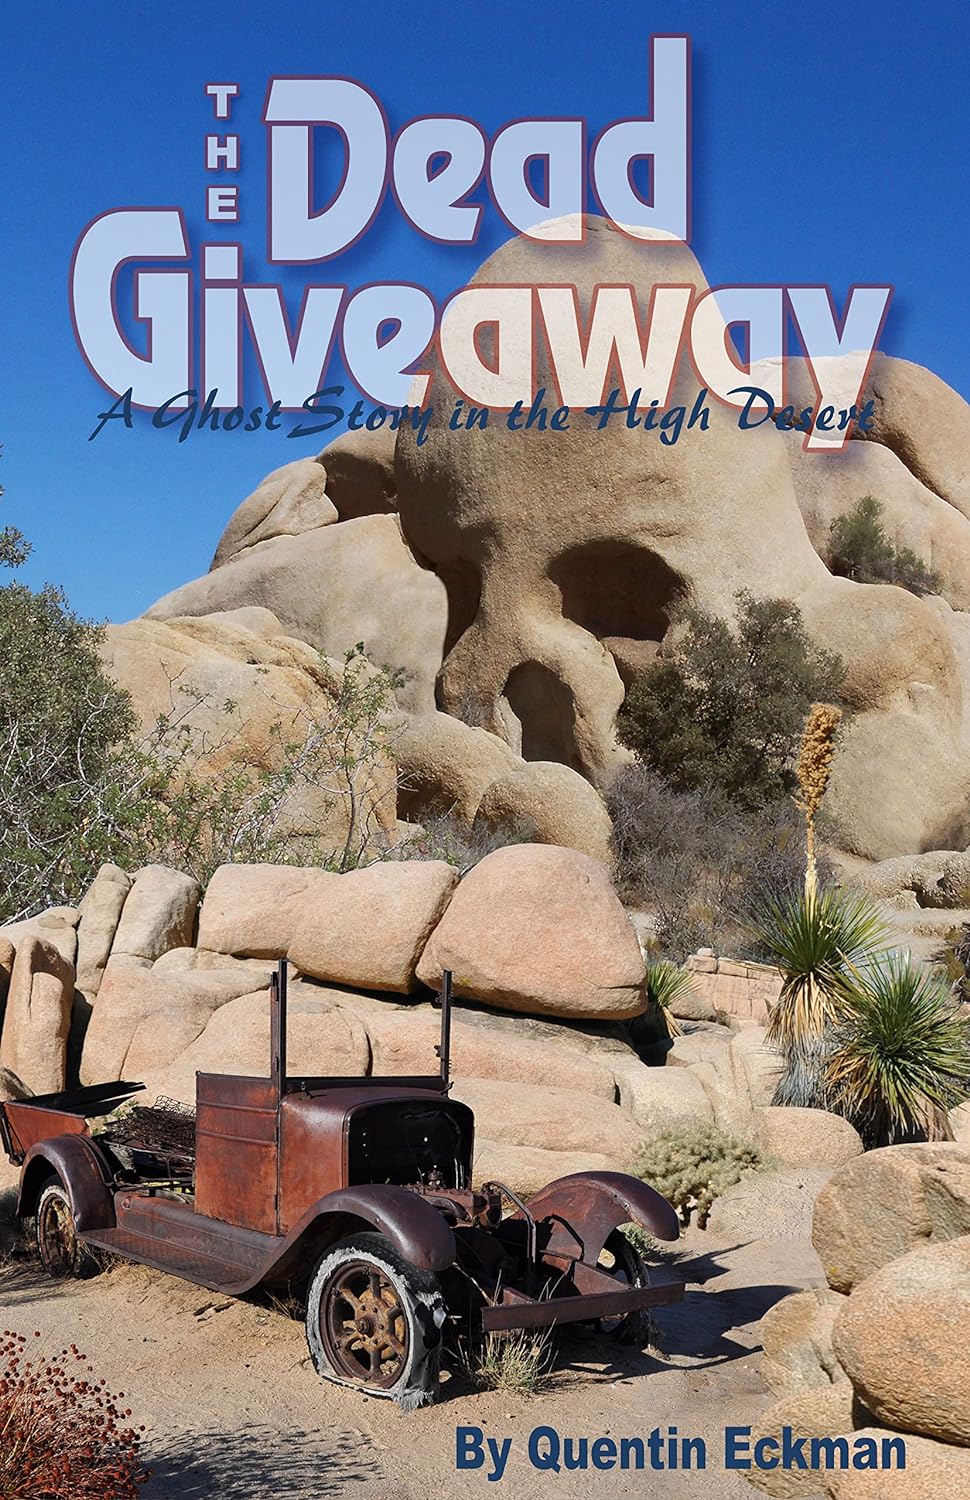 The Dead Giveaway: A Ghost Story in the High Desert